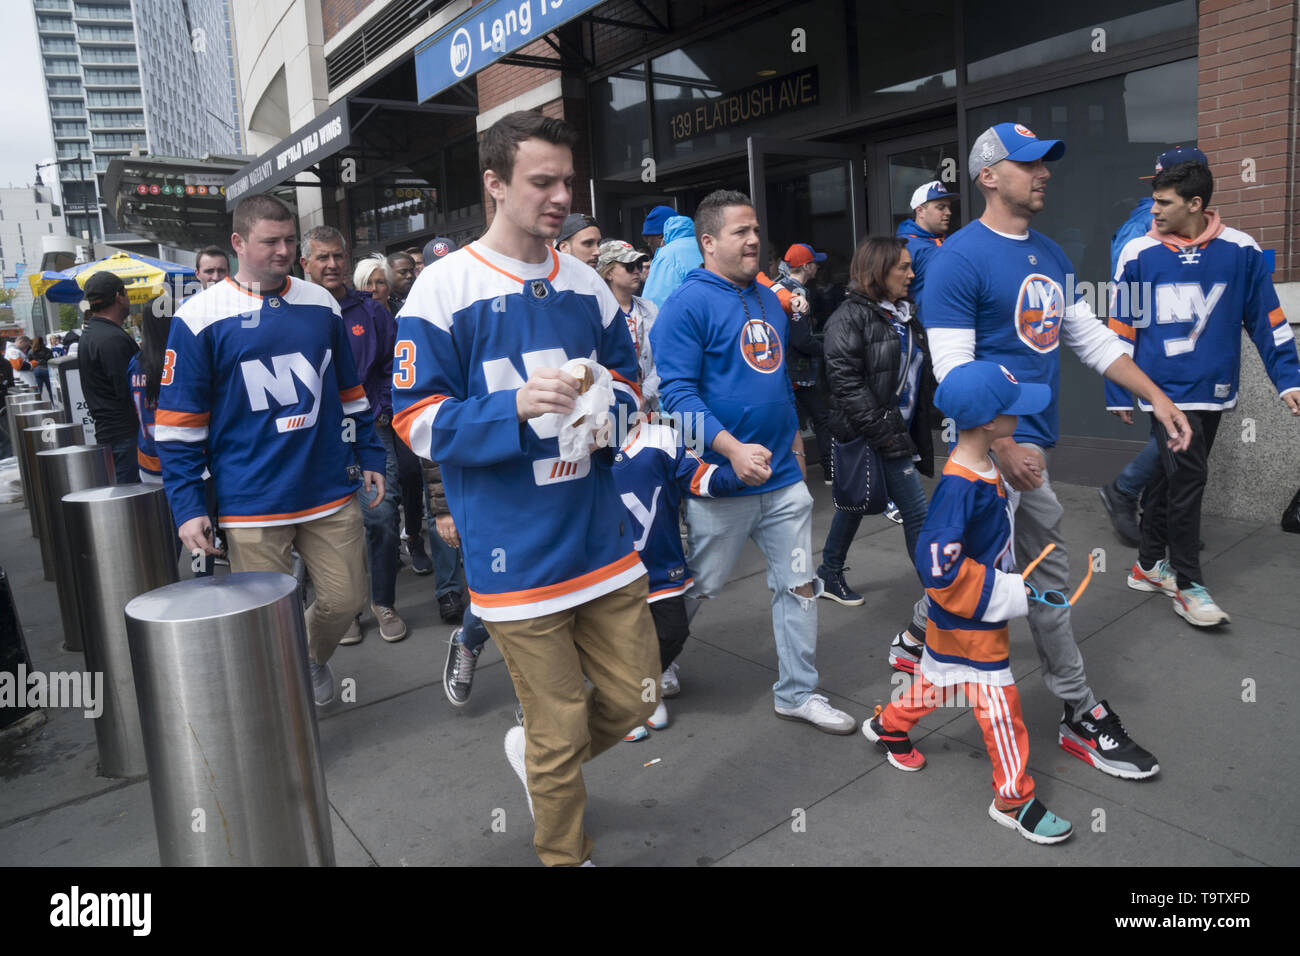 Devoted New York Rangers fans walk from the LIRR station to the Stanley Cup Playoffs at Barklays Center in Brooklyn, New York. Stock Photo